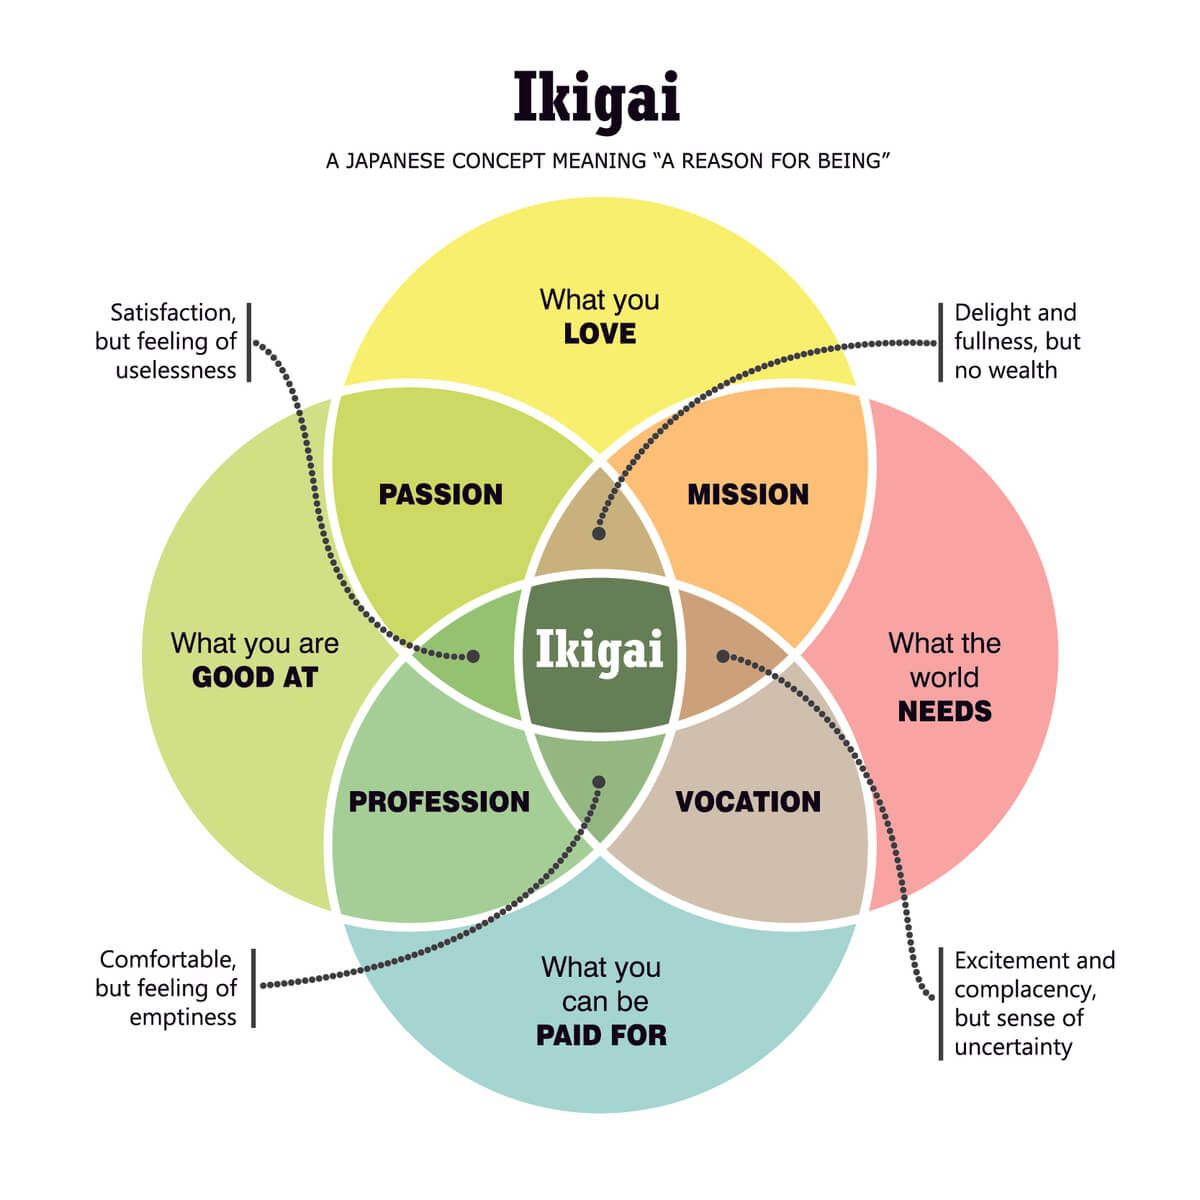 ikigai-chart-reason-for-being_1088160854